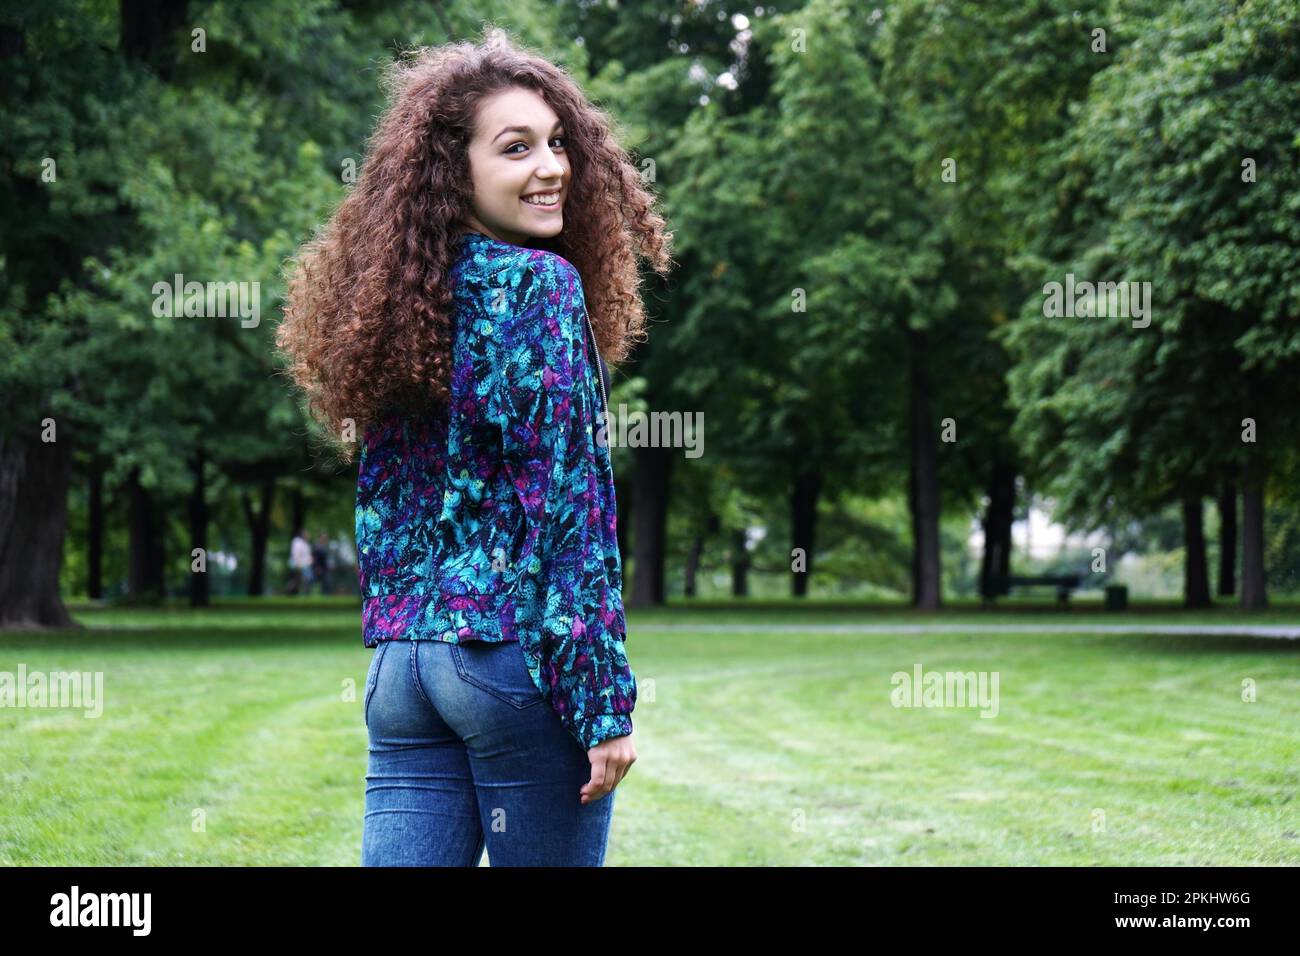 rear view of a young woman in a park looking back over her shoulder Stock Photo